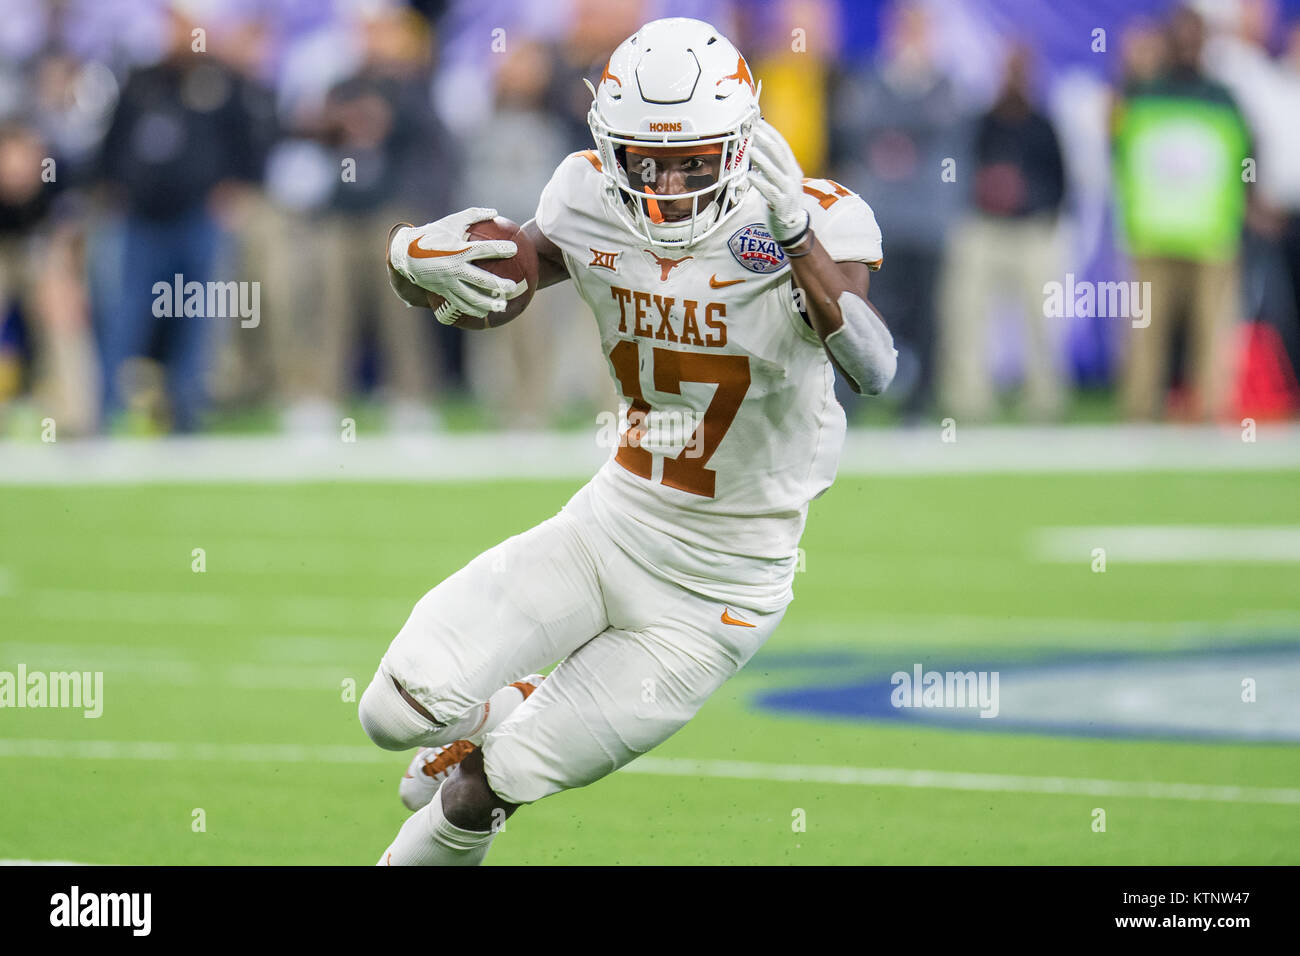 Houston, TX, USA. 27th Dec, 2017. Texas Longhorns wide receiver Reggie Hemphill-Mapps (17) runs with the ball during the 4th quarter of the Texas Bowl NCAA football game between the Texas Longhorns and the Missouri Tigers at NRG Stadium in Houston, TX. Texas won the game 33 to 16.Trask Smith/CSM/Alamy Live News Stock Photo